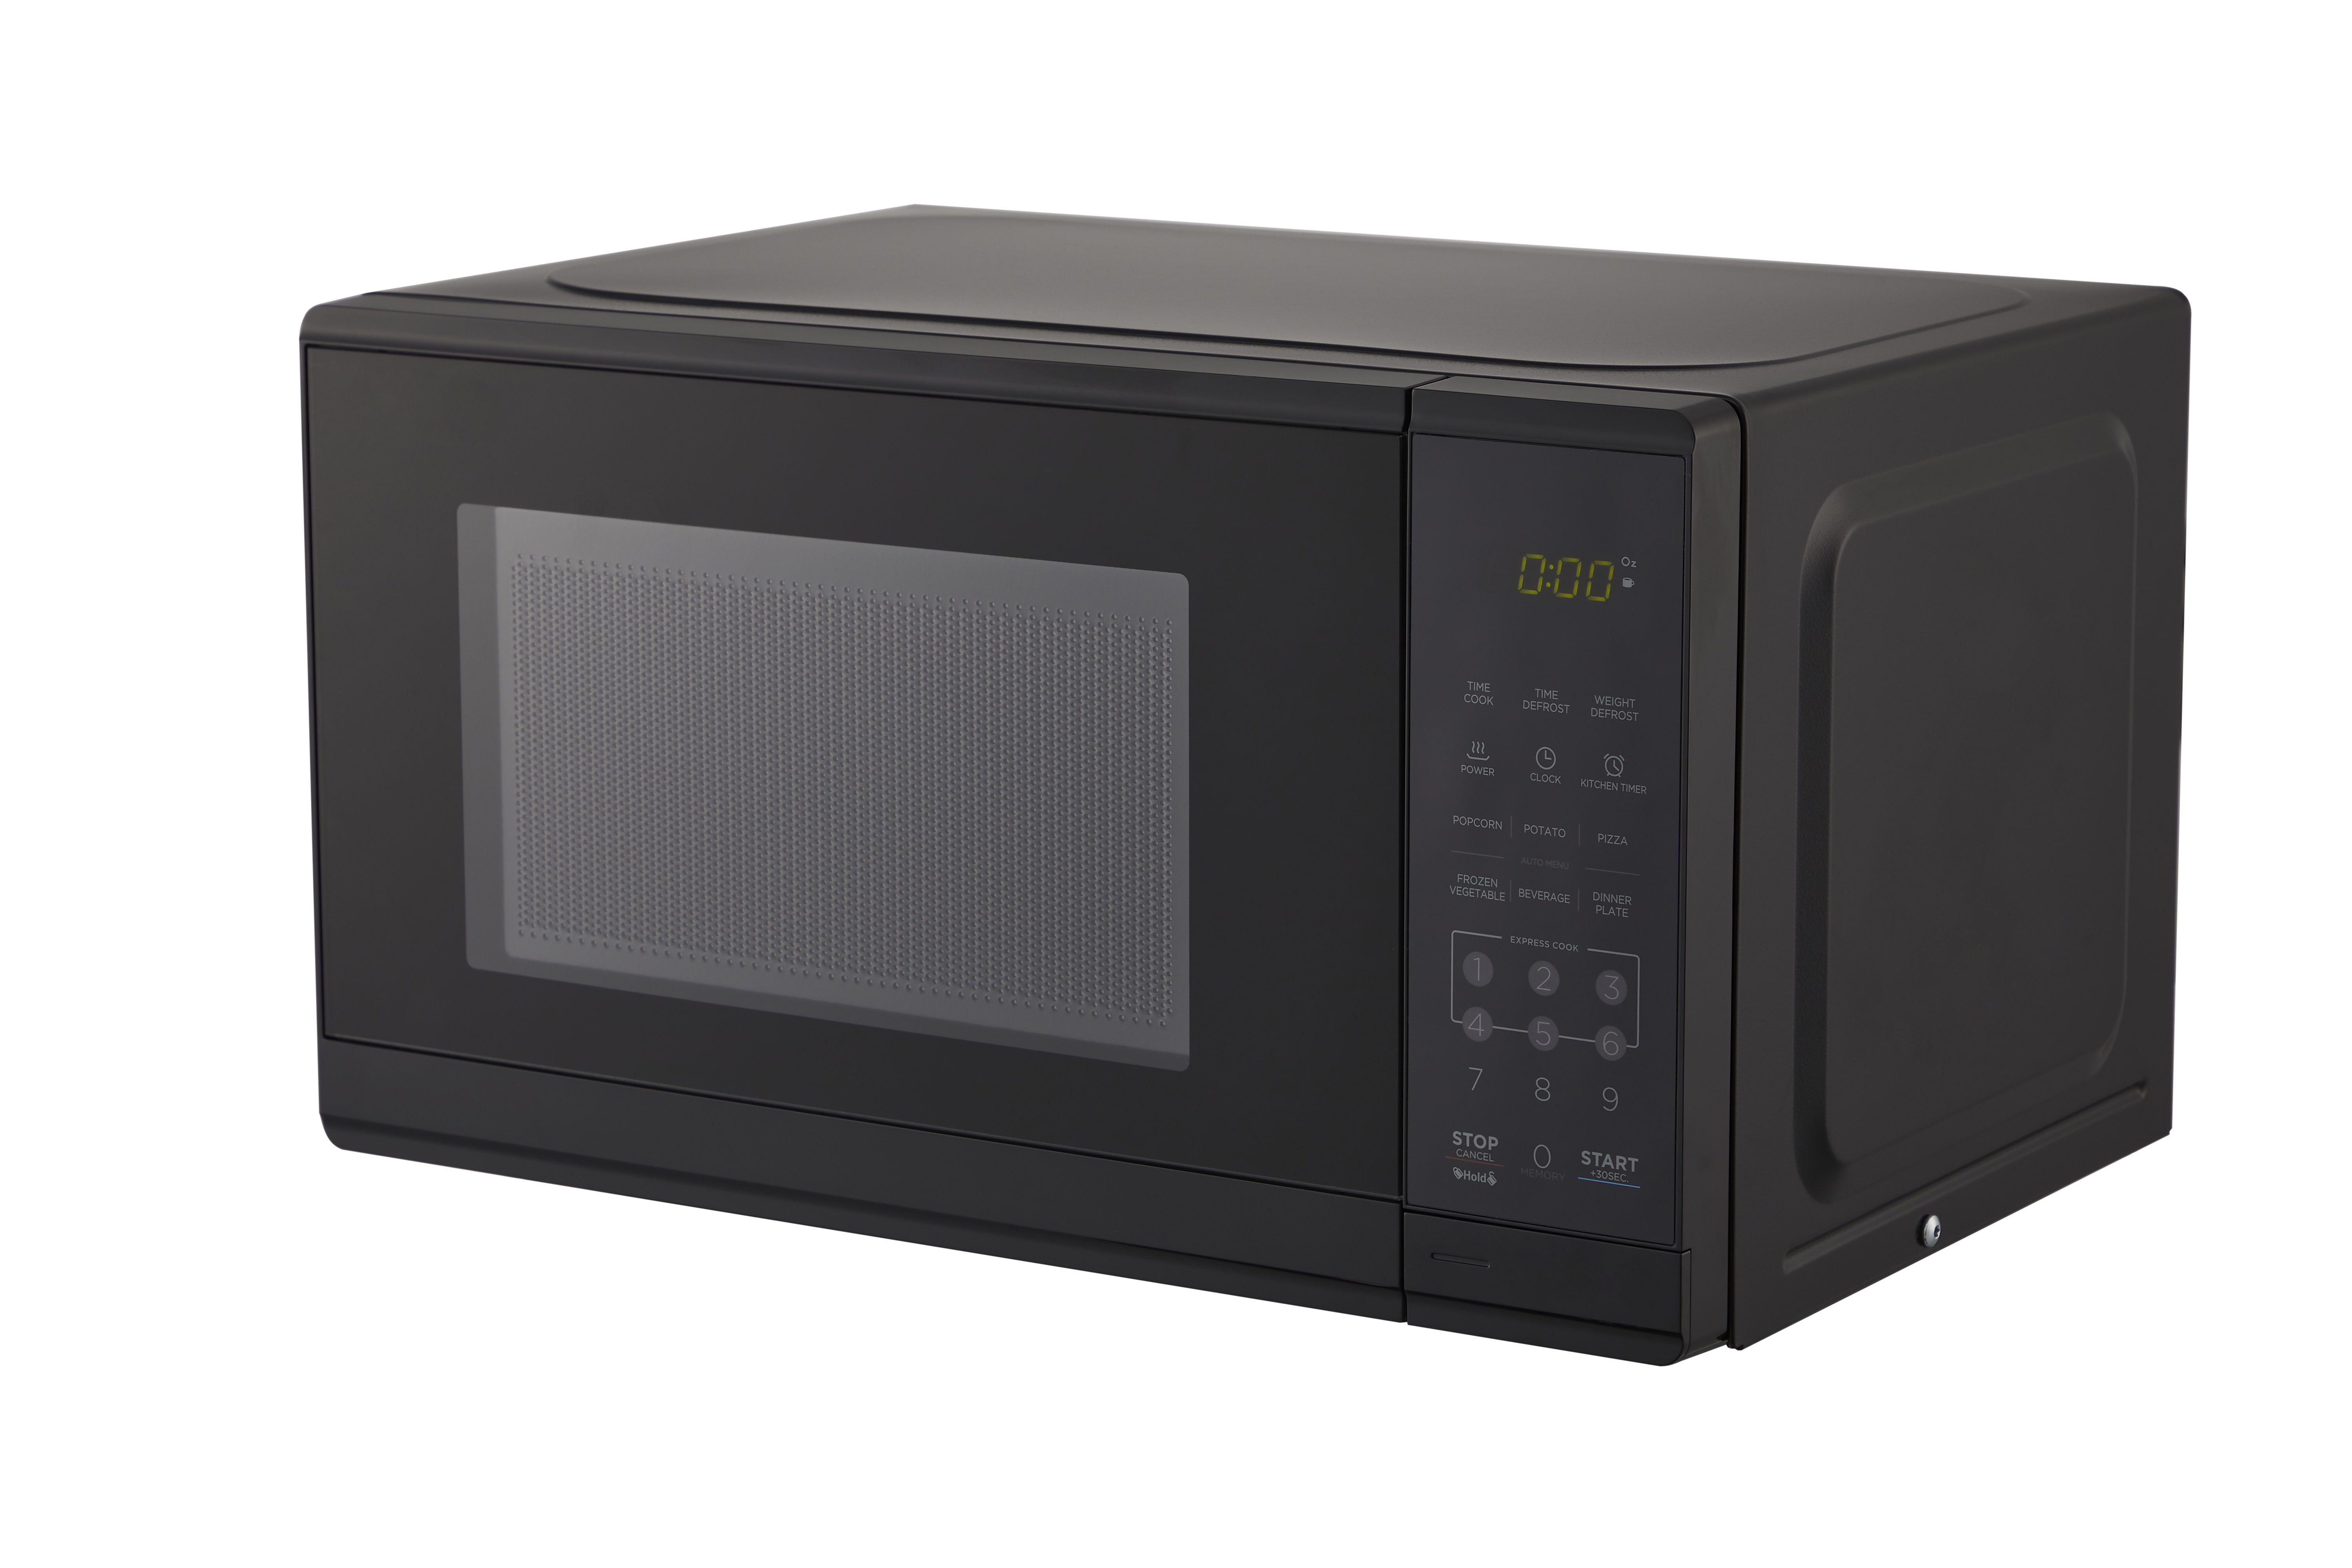 Compact, 0.7 cu. ft. 230 Volt Microwave by Muave